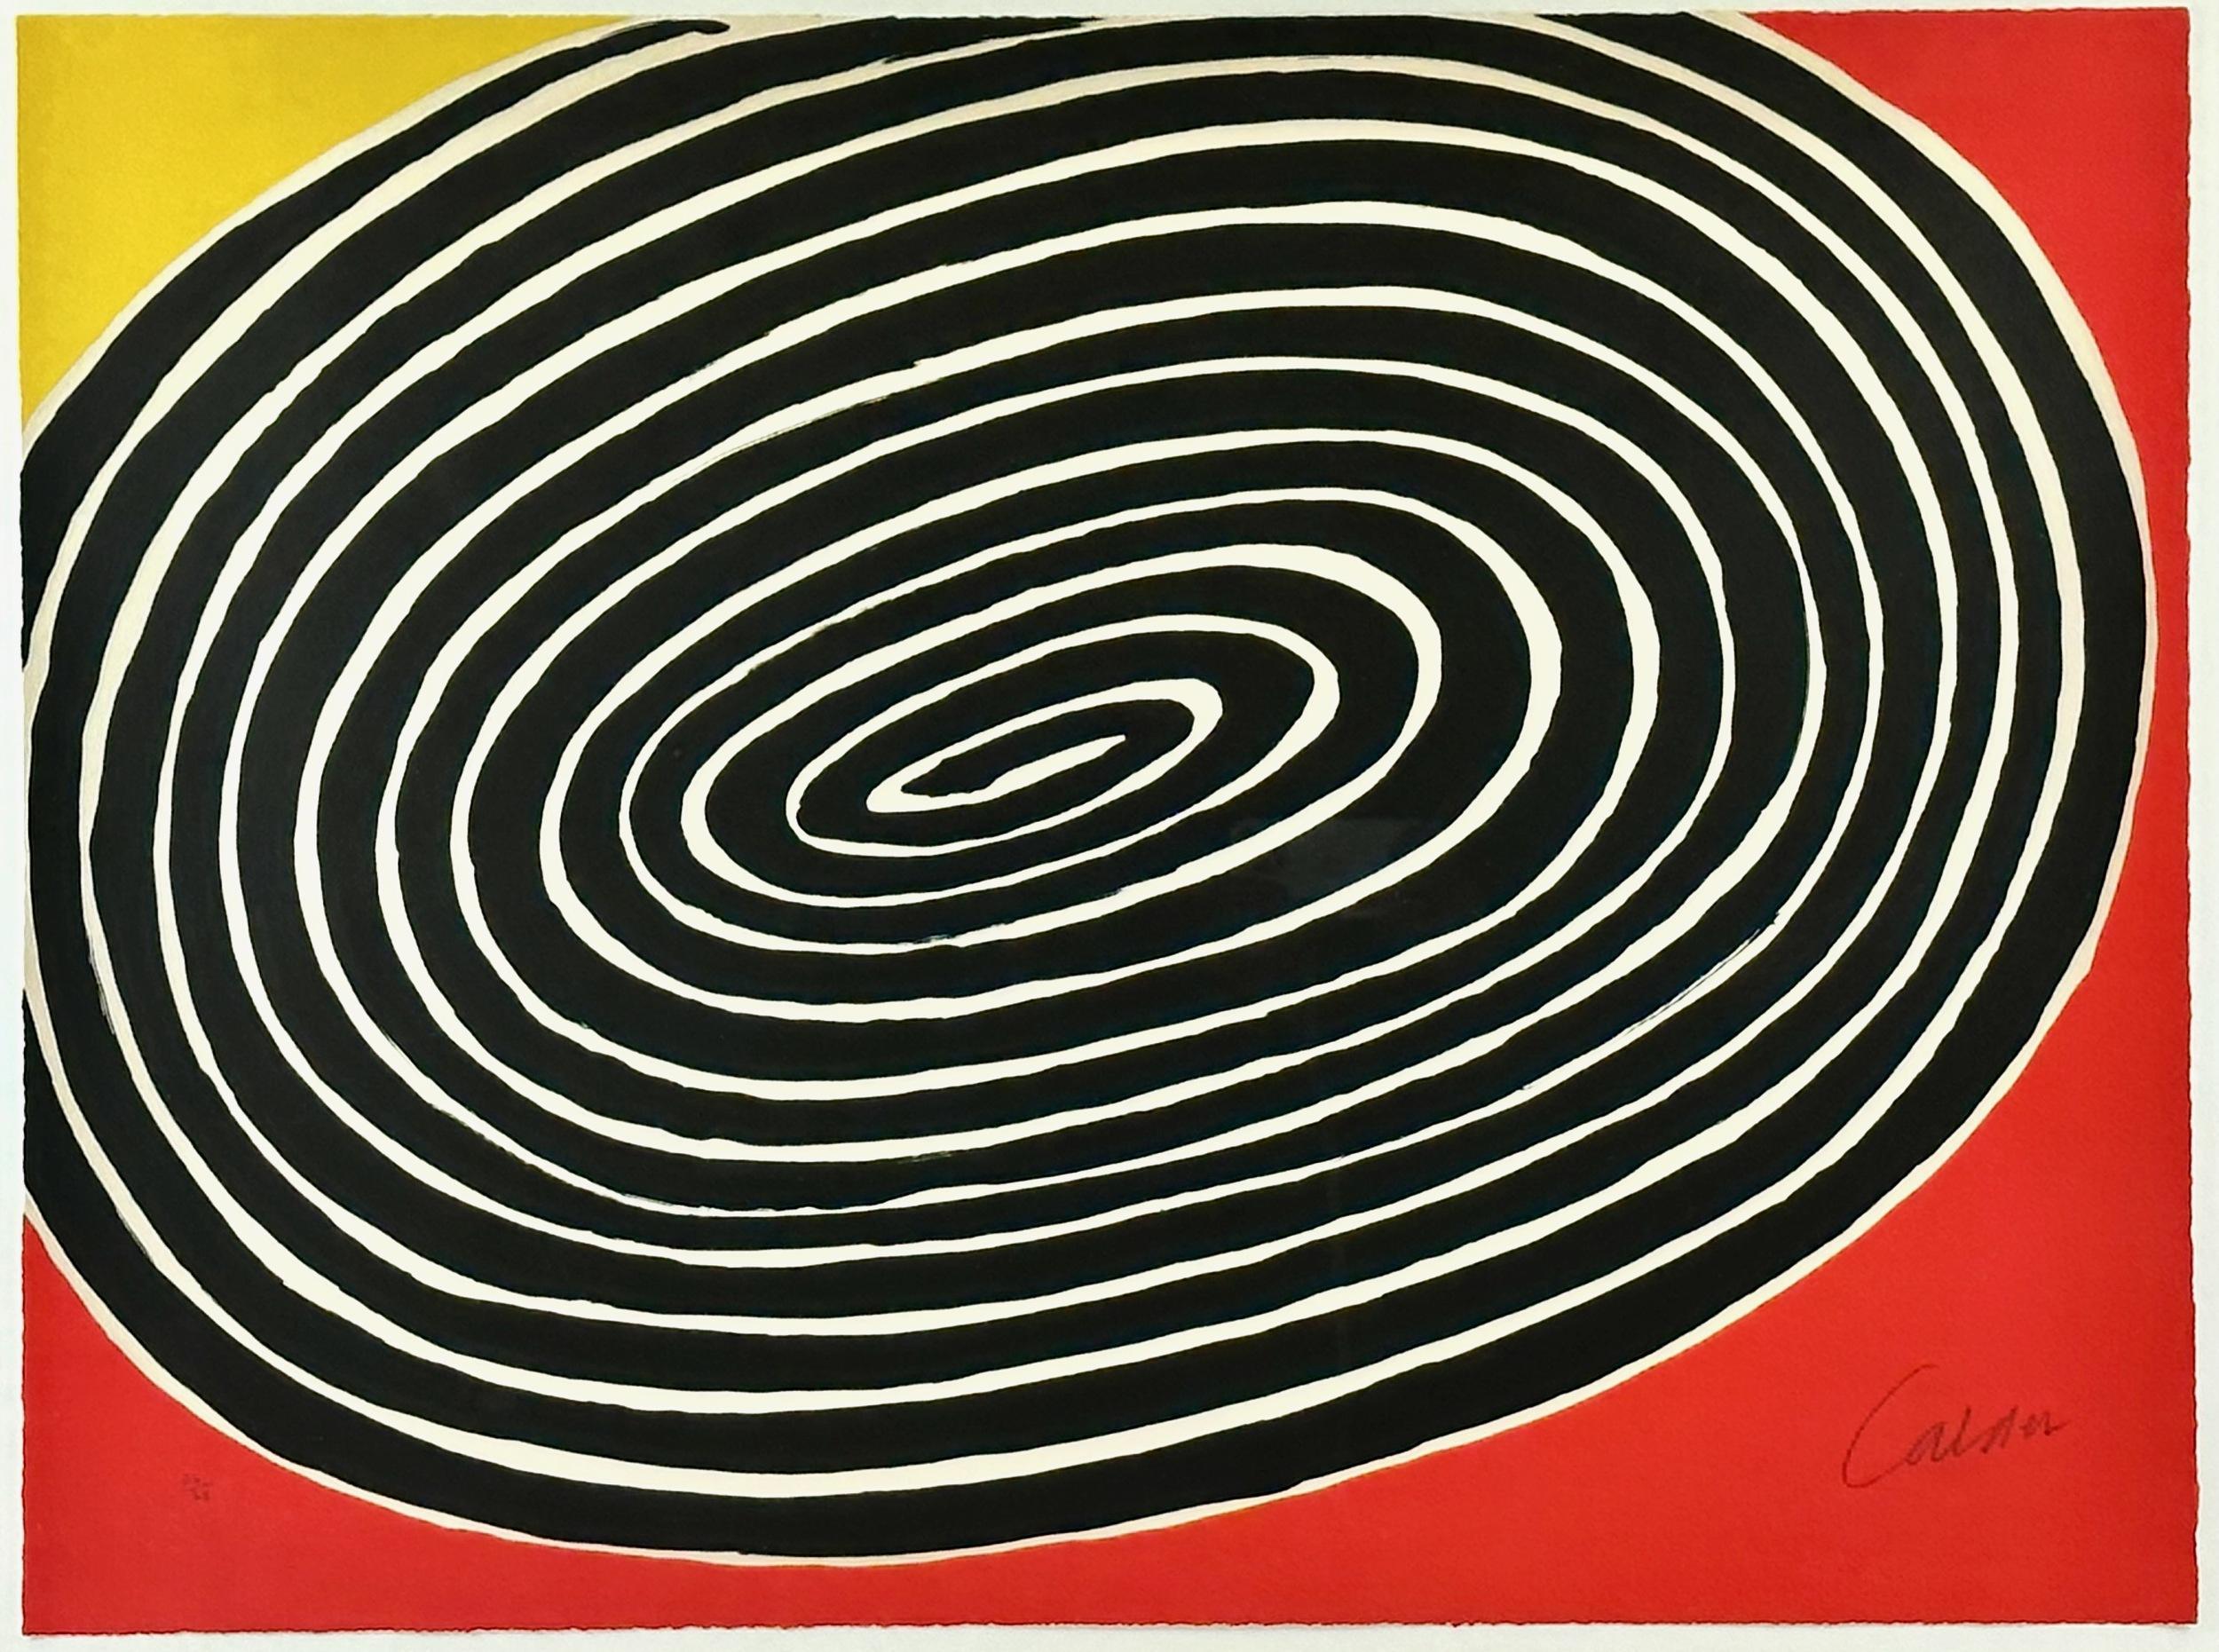 Petite Spirale, 1976

Lithograph in colors, on wove paper, the full sheet

Published by Maeght Editeur, Paris

21 7/10 × 30 3/5 inches (55.2 × 77.8 cm)

Signed and numbered in pencil, edition of 75 copies 

Professionally framed

Alexander Calder